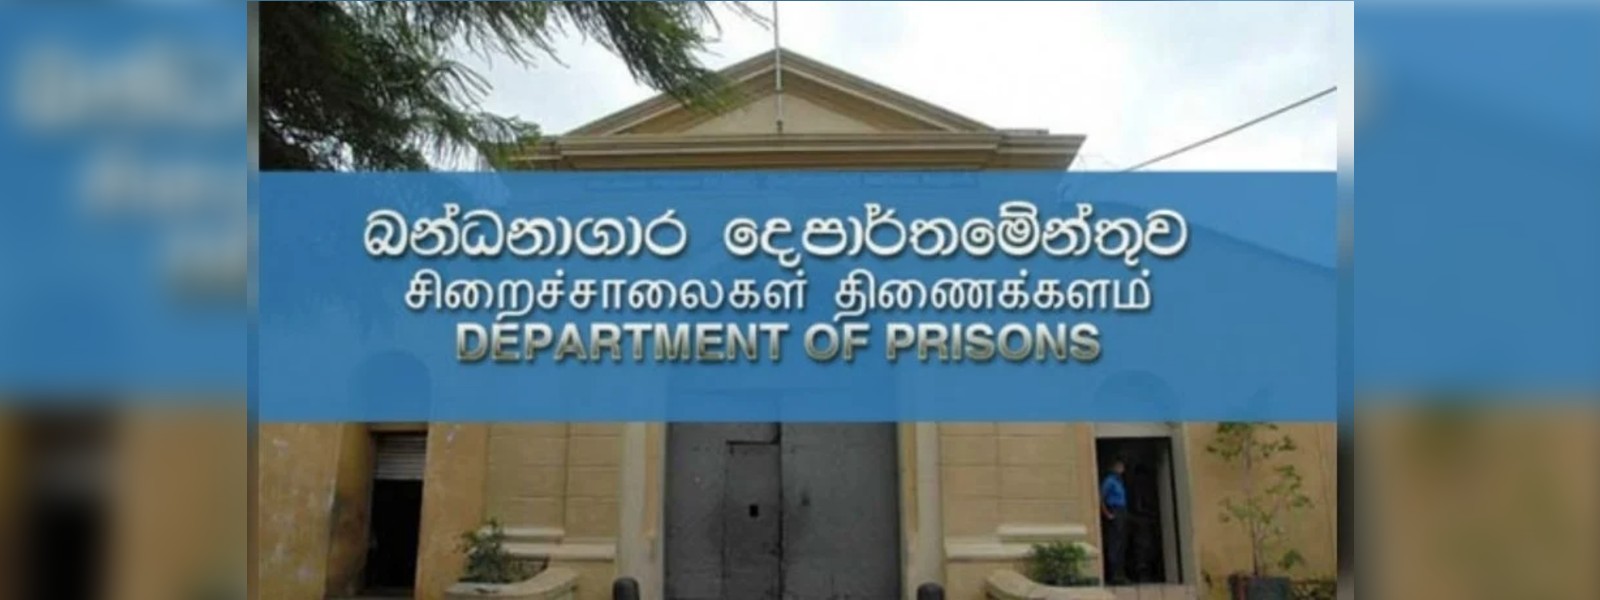 15 prison officers interdicted in three months; Prisons Department